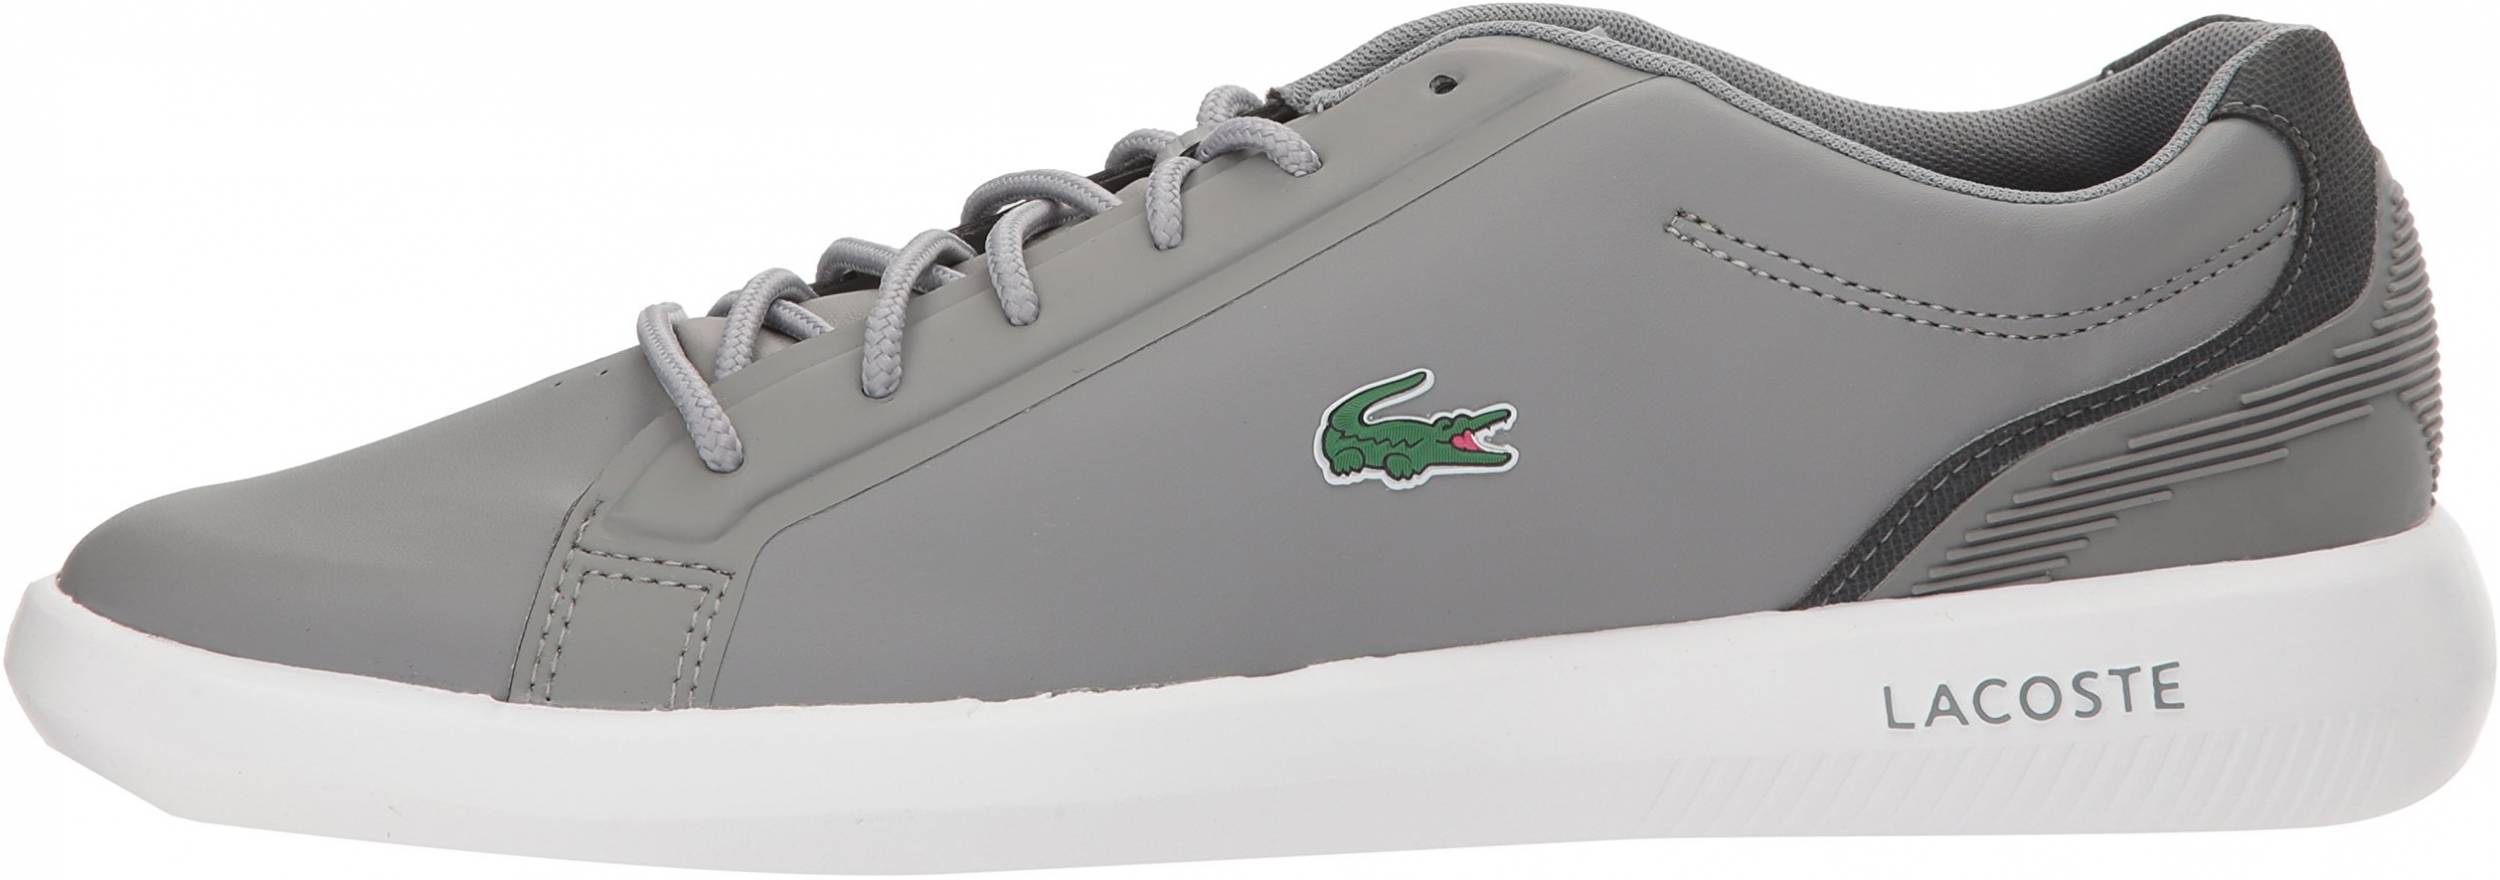 latest lacoste sneakers 2019